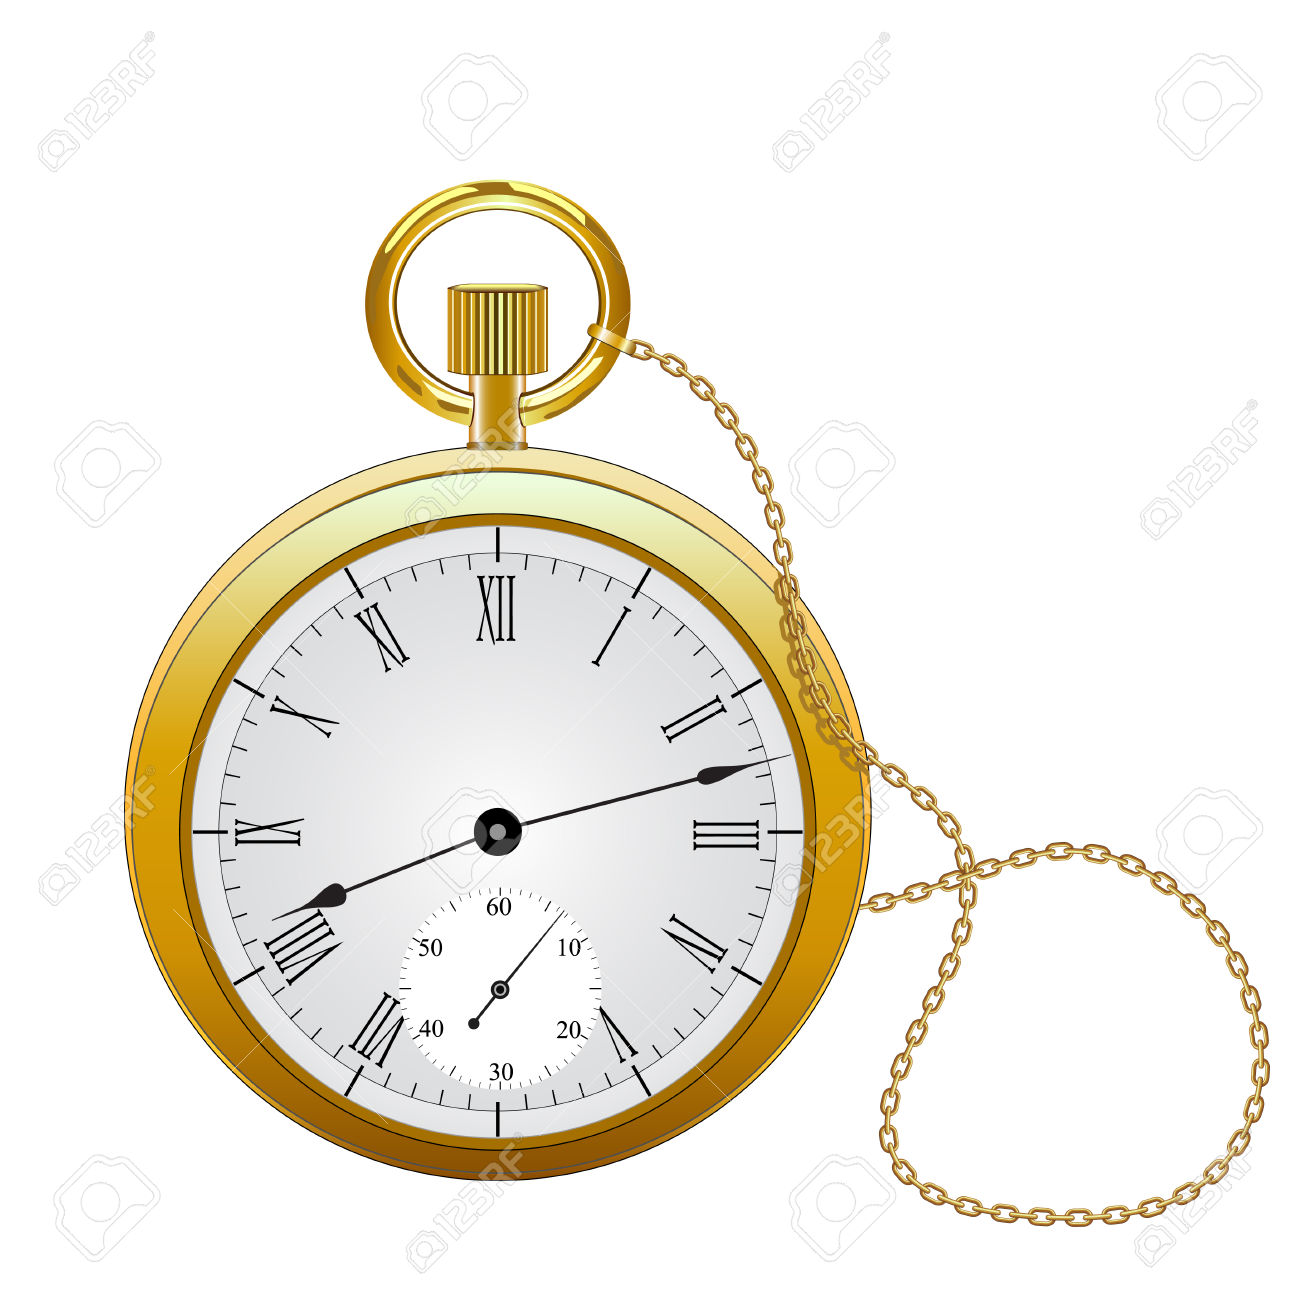 pocket watch clipart free - photo #34